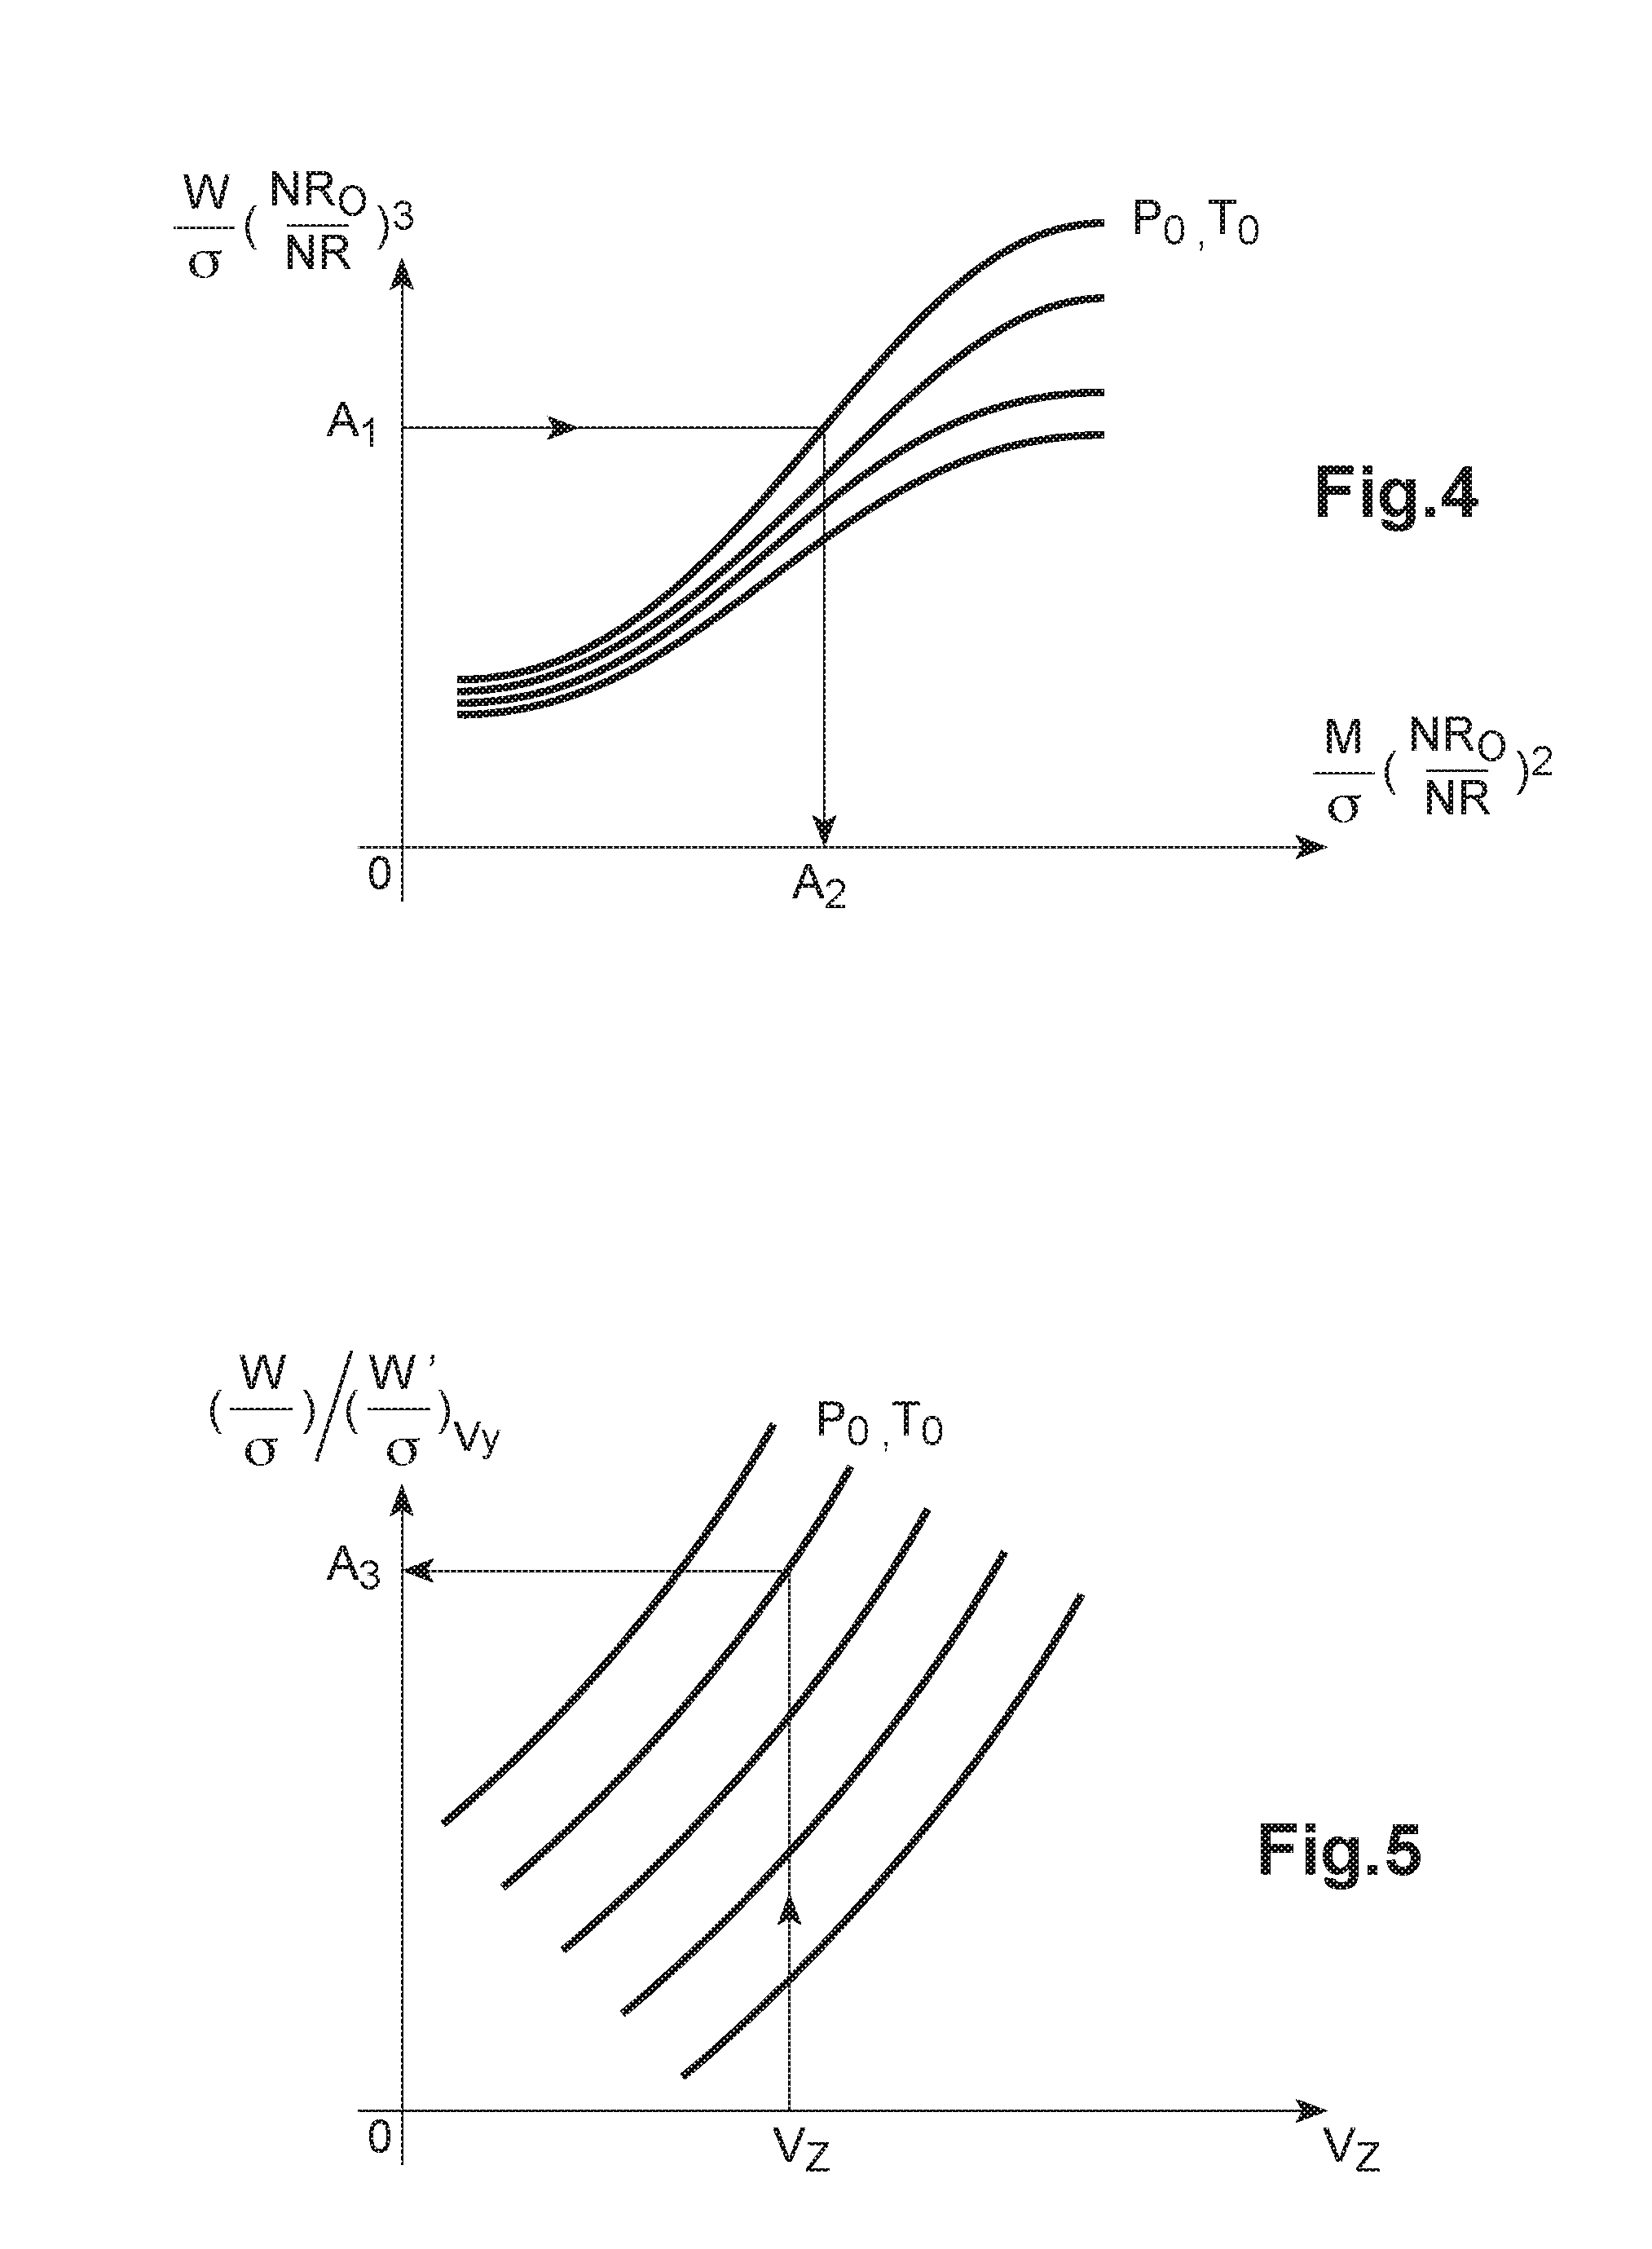 Method of estimating the instantaneous mass of a rotary wing aircraft